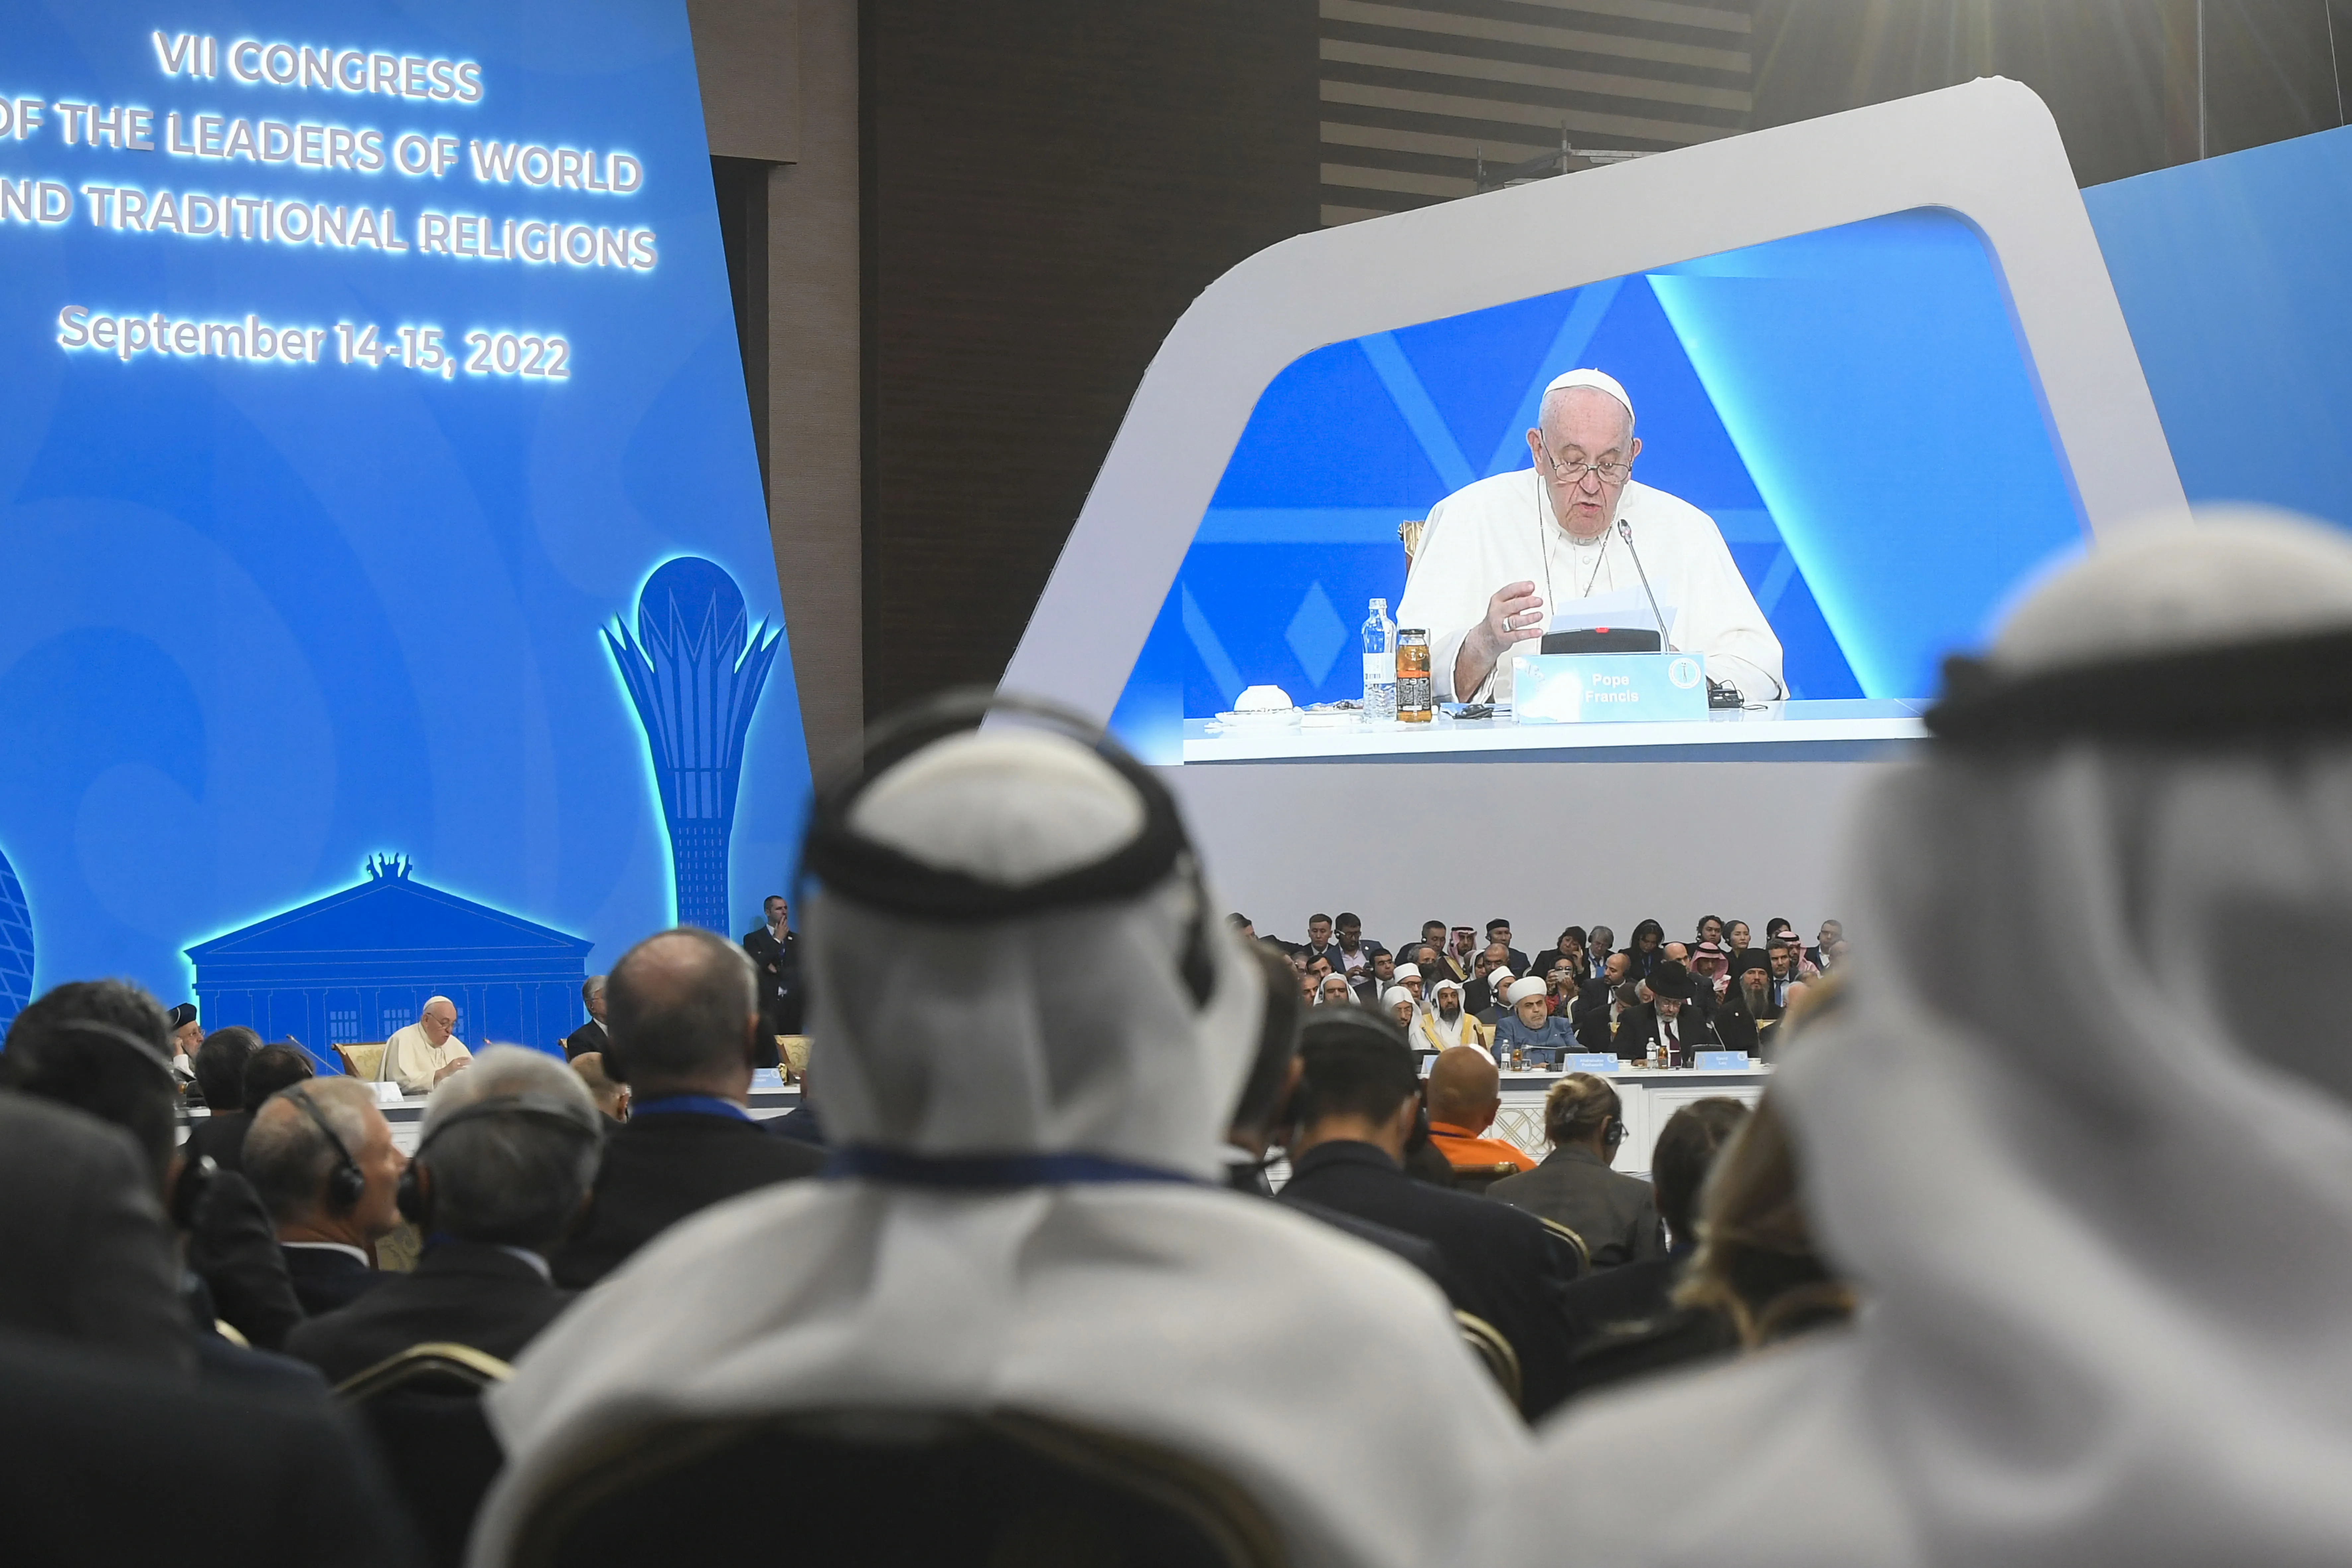 Pope Francis speaking at the opening and plenary session of the Seventh Congress of Leaders of World and Traditional Religions at the Palace of Independence in Nur-Sultan, Kazakhstan, Sept. 14, 2022?w=200&h=150